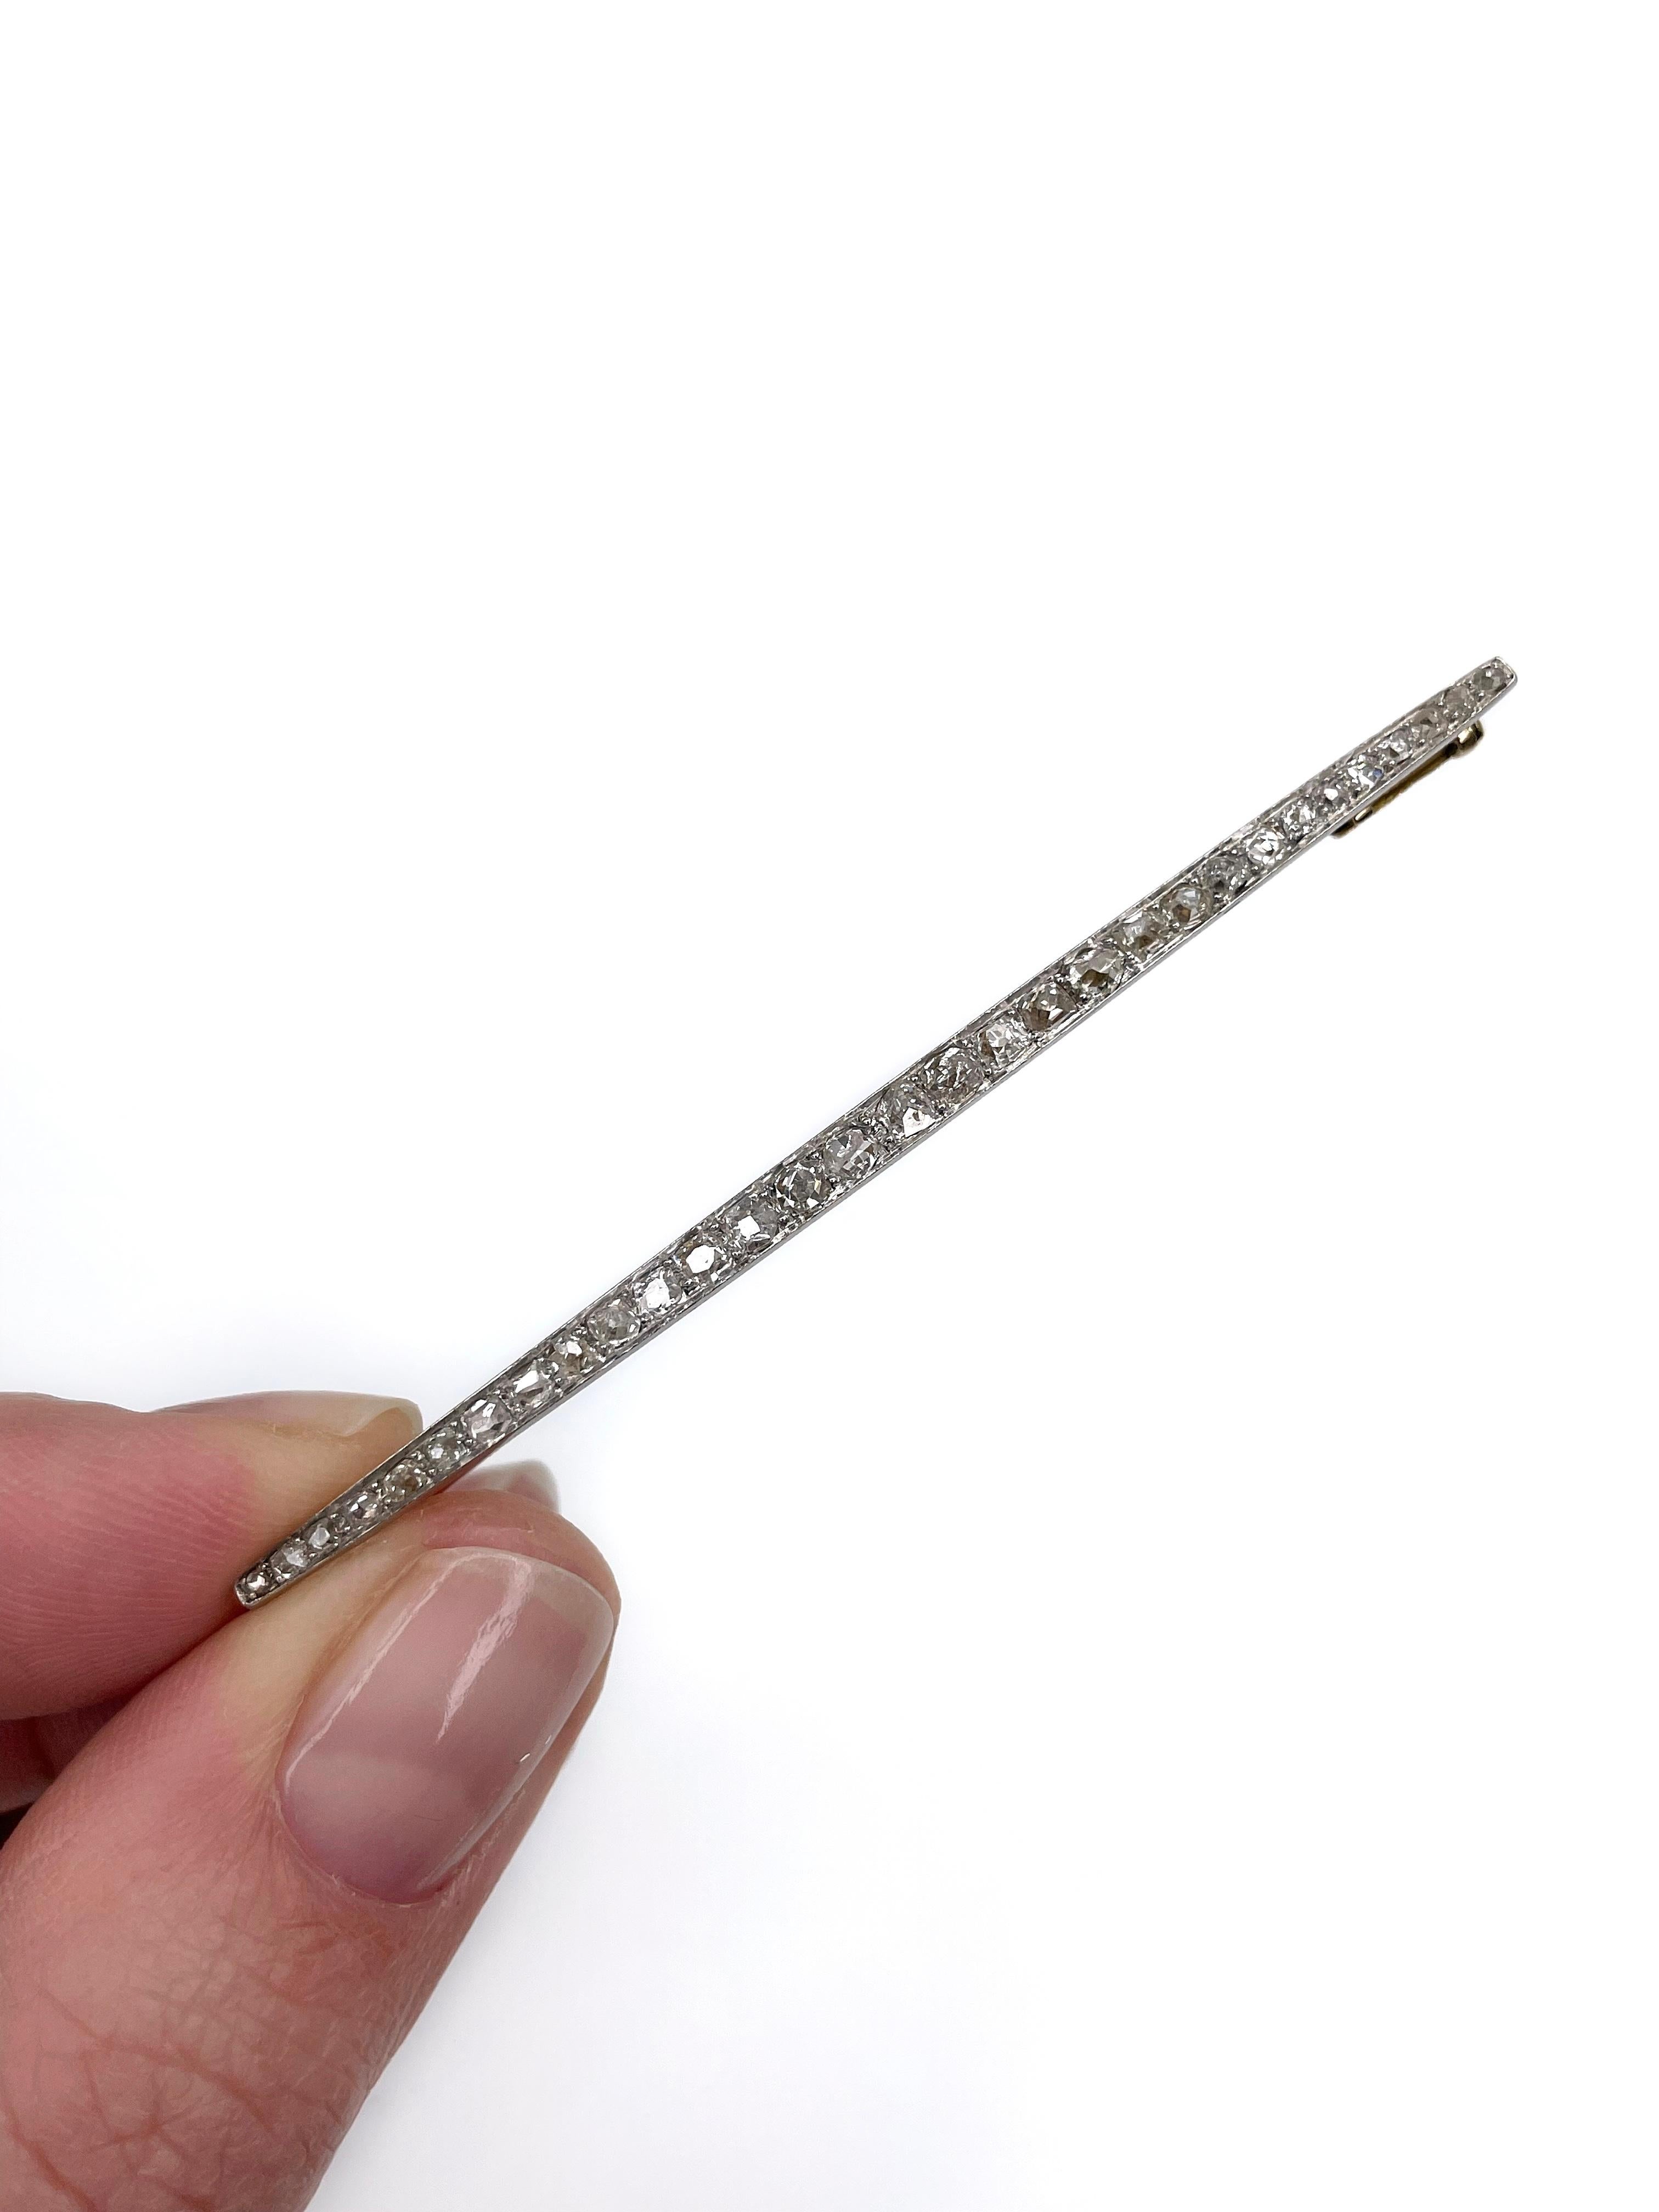 This is an Edwardian bar brooch crafted in 18K white gold and adorned with 900 hallmark platinum. Circa 1910. The piece features 31 old cut diamonds: RW-STW, VS-P1.

Weight: 4.72g
Length: 7cm
Width: 0.3cm

———

If you have any questions, please feel